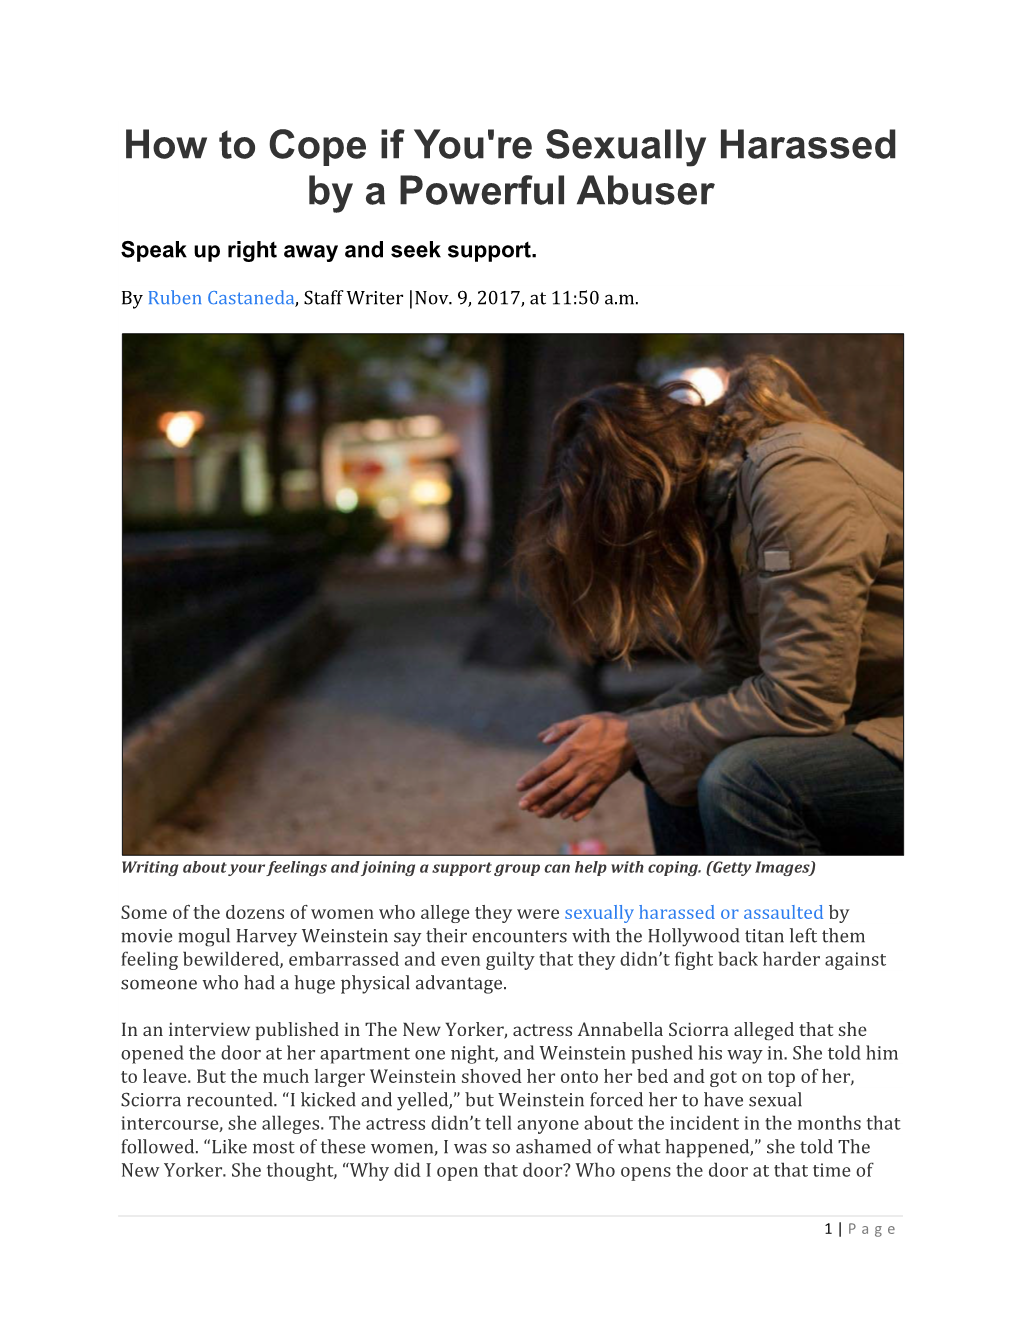 How to Cope If You're Sexually Harassed by a Powerful Abuser